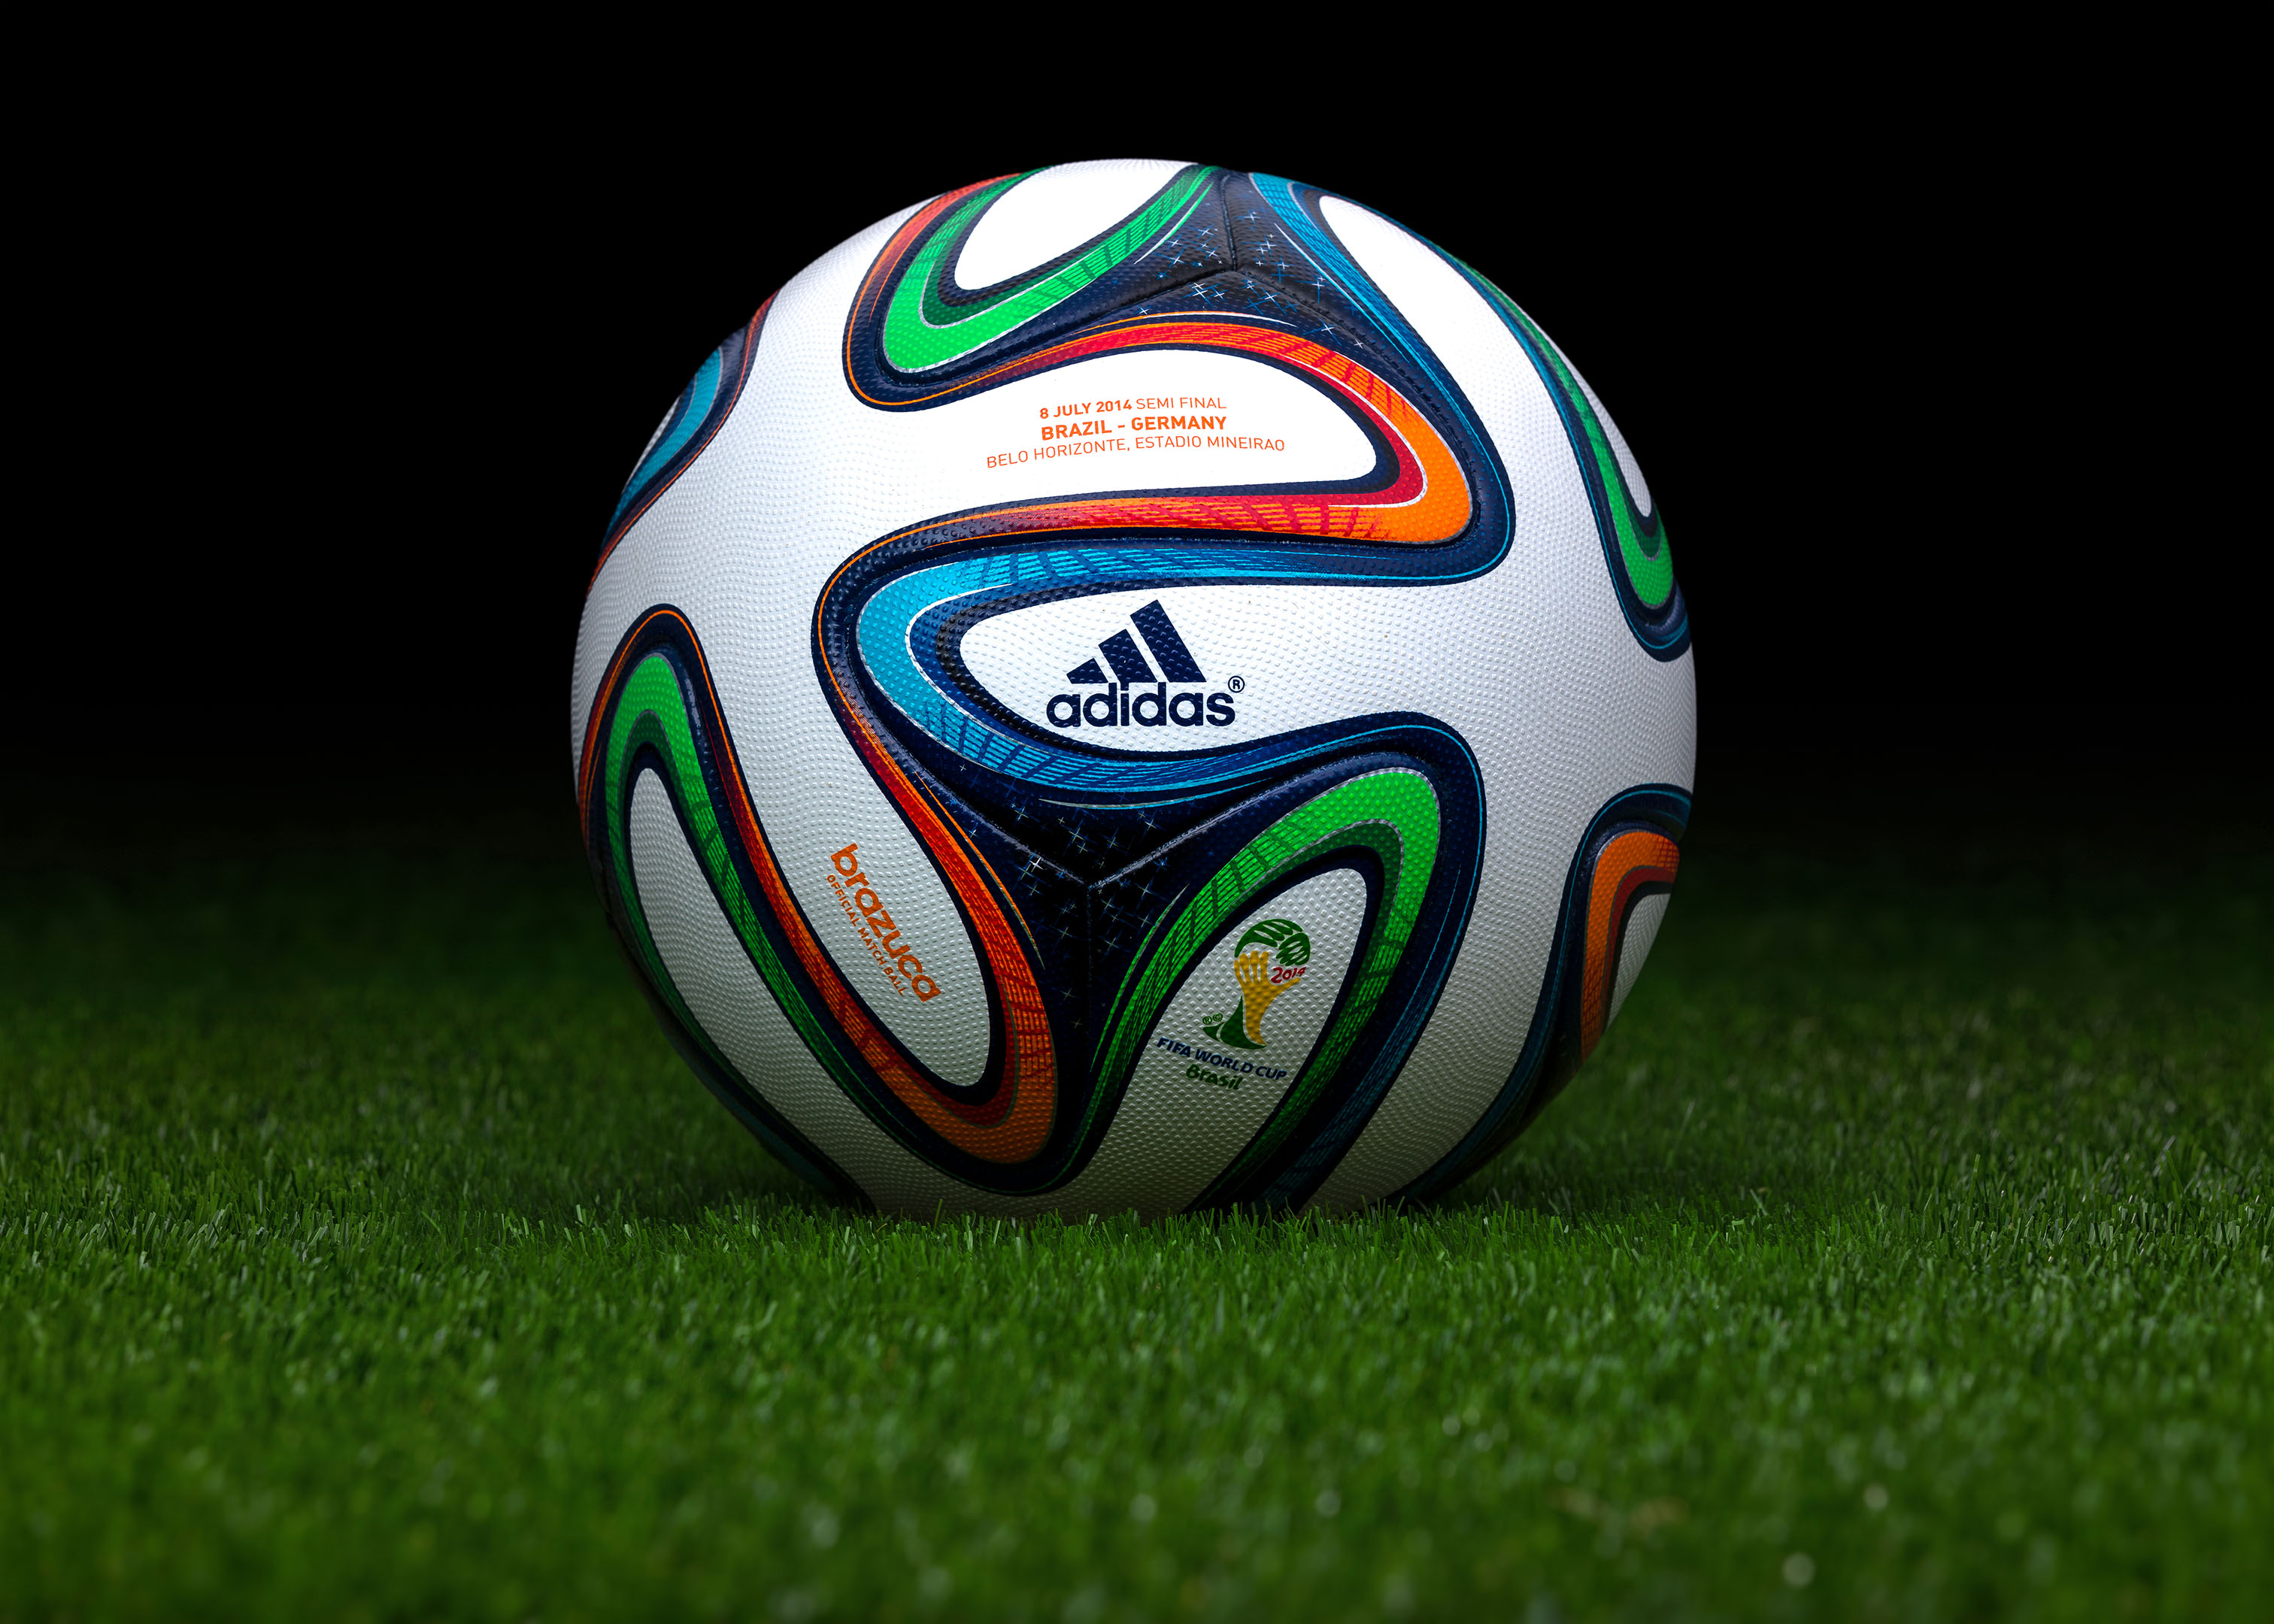 Made in China match ball (game used) FIFA World Cup 2014 Brazil Adidas  Brazuca Rio (Brazil - Germany) 